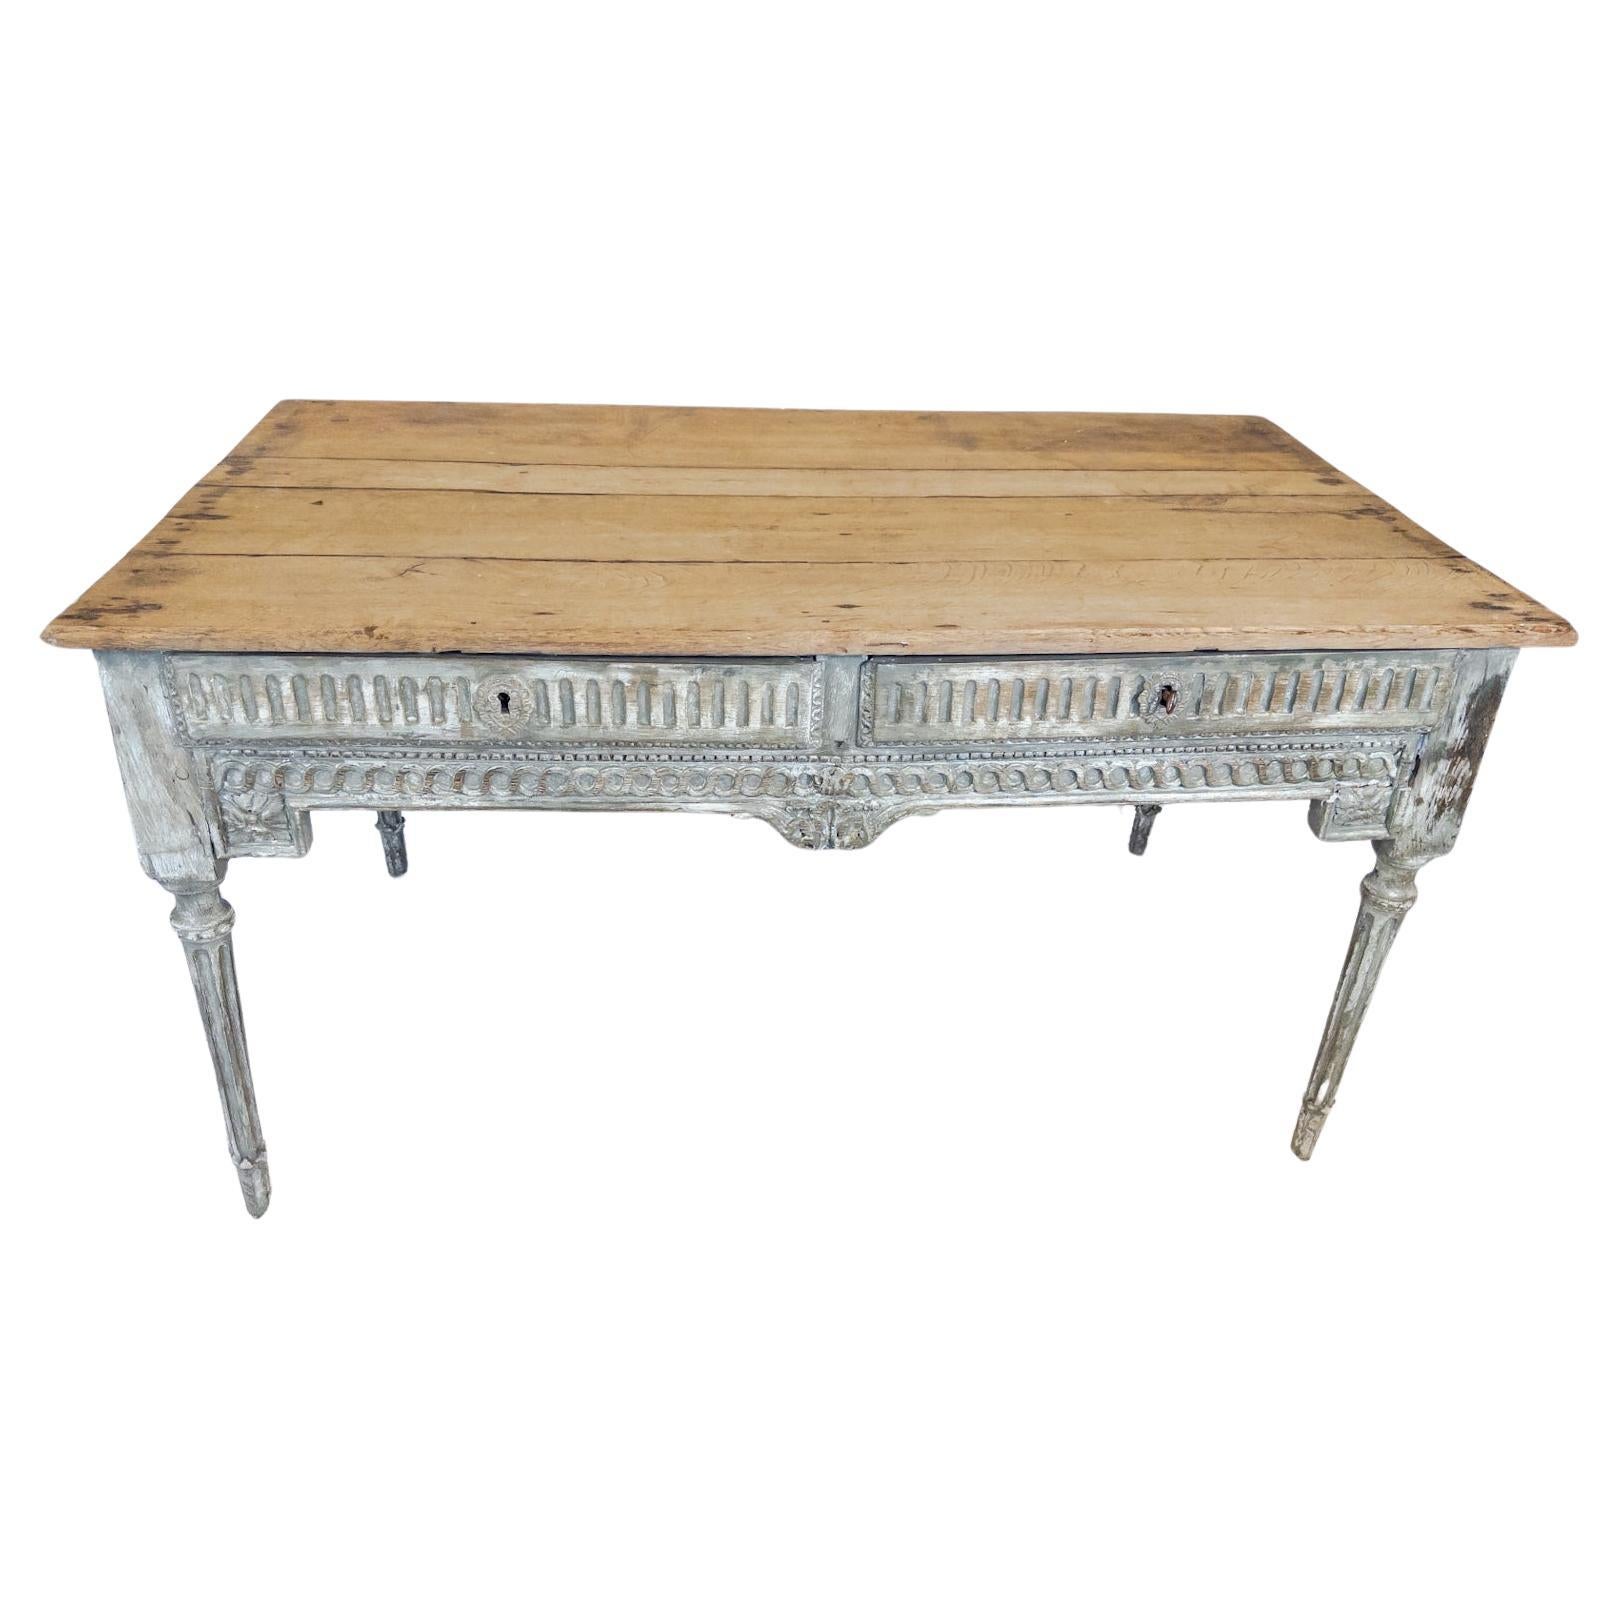 18th Century Louis XVI Style Blue Painted Table / Desk from France For Sale